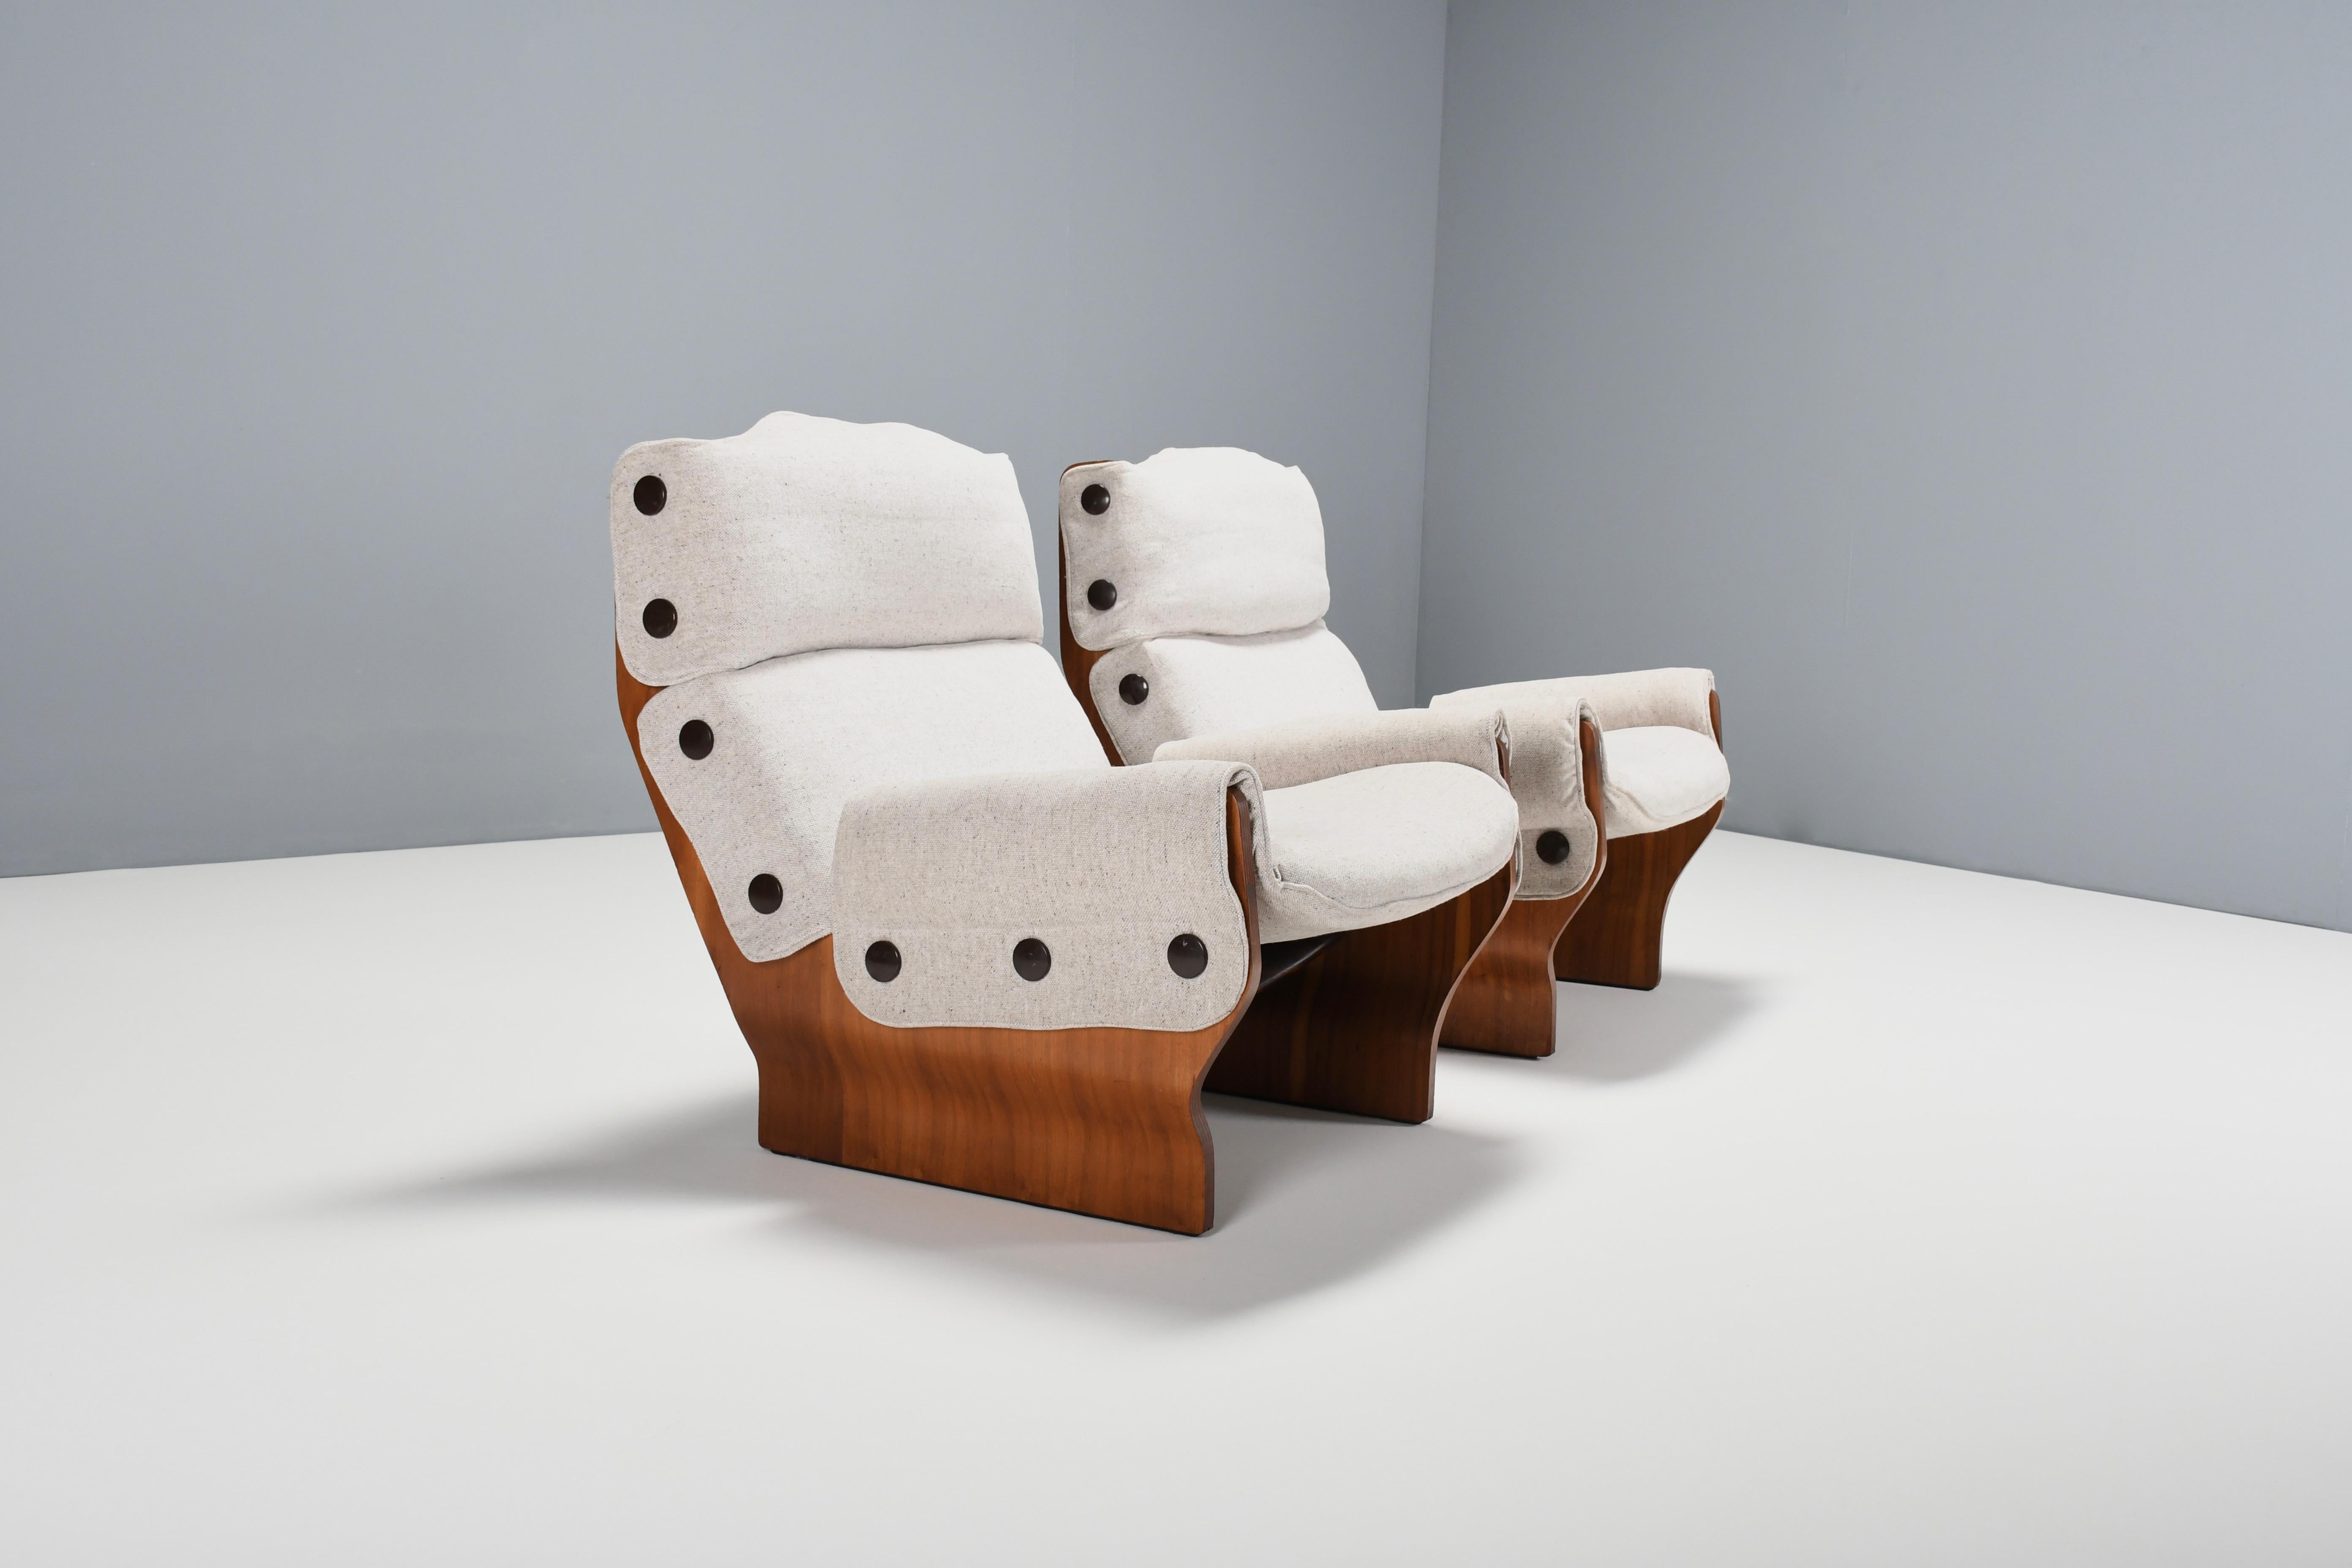 Set of beautiful P110 lounge chairs in very good condition.

Designed by Osvaldo Borsani in 1965 

Produced by Tecno, Italy

These chairs are extremely comfortable with a curved wooden frame and soft cushions.

The cushions are reupholstered in a